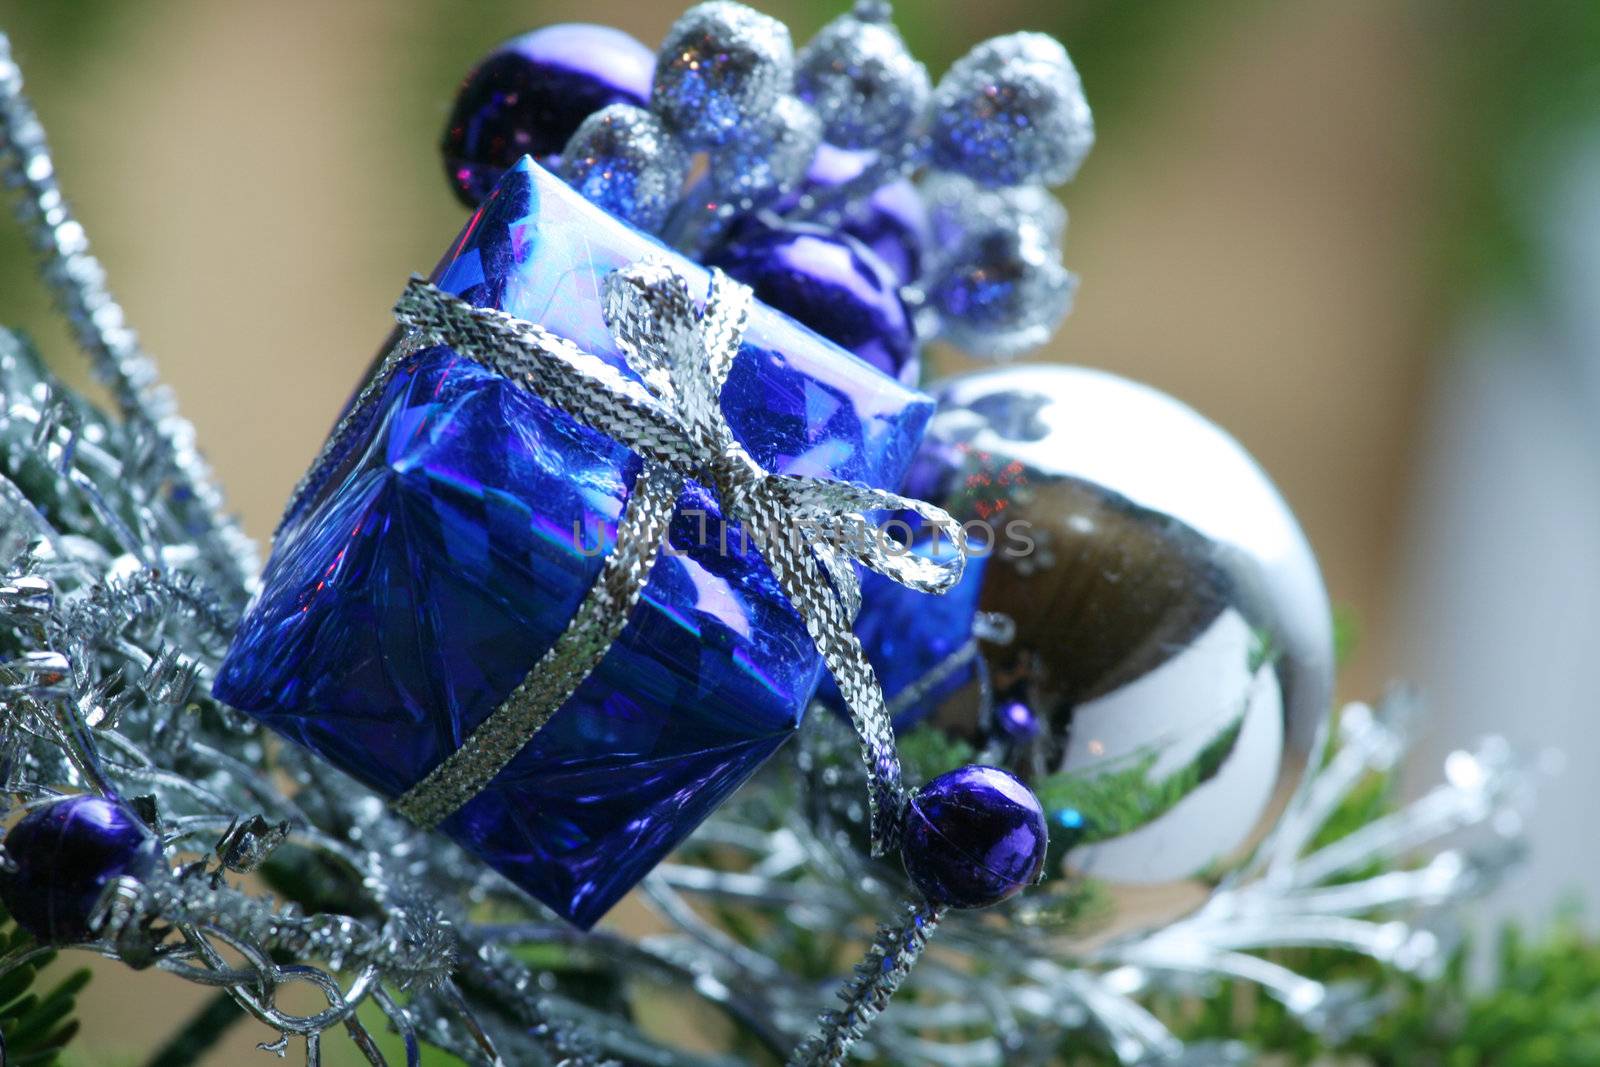 Blue present ornament nestled in CHristmas tree. by jarenwicklund